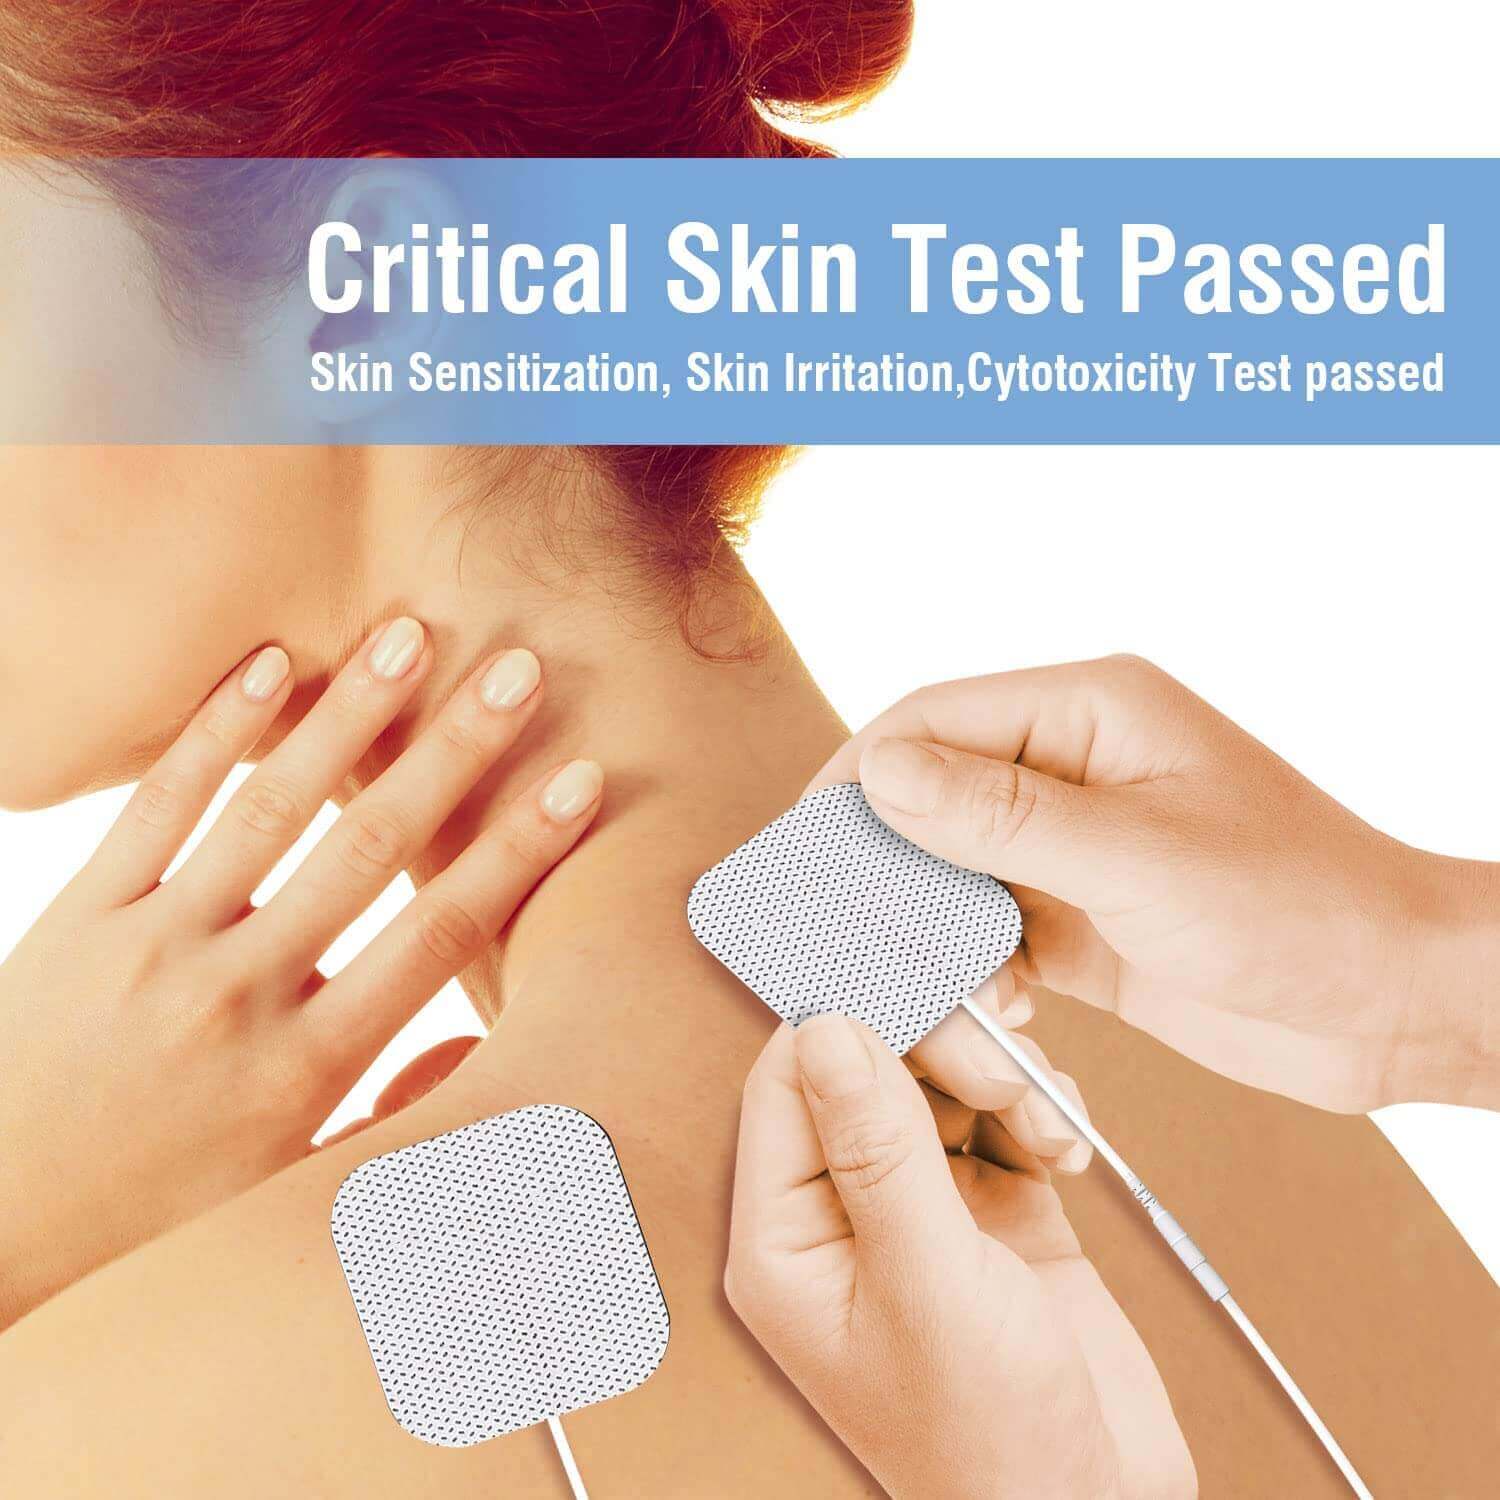 DONECO replacement pads for tens unit - 48 Pcs - 2x2in critical skin test passed